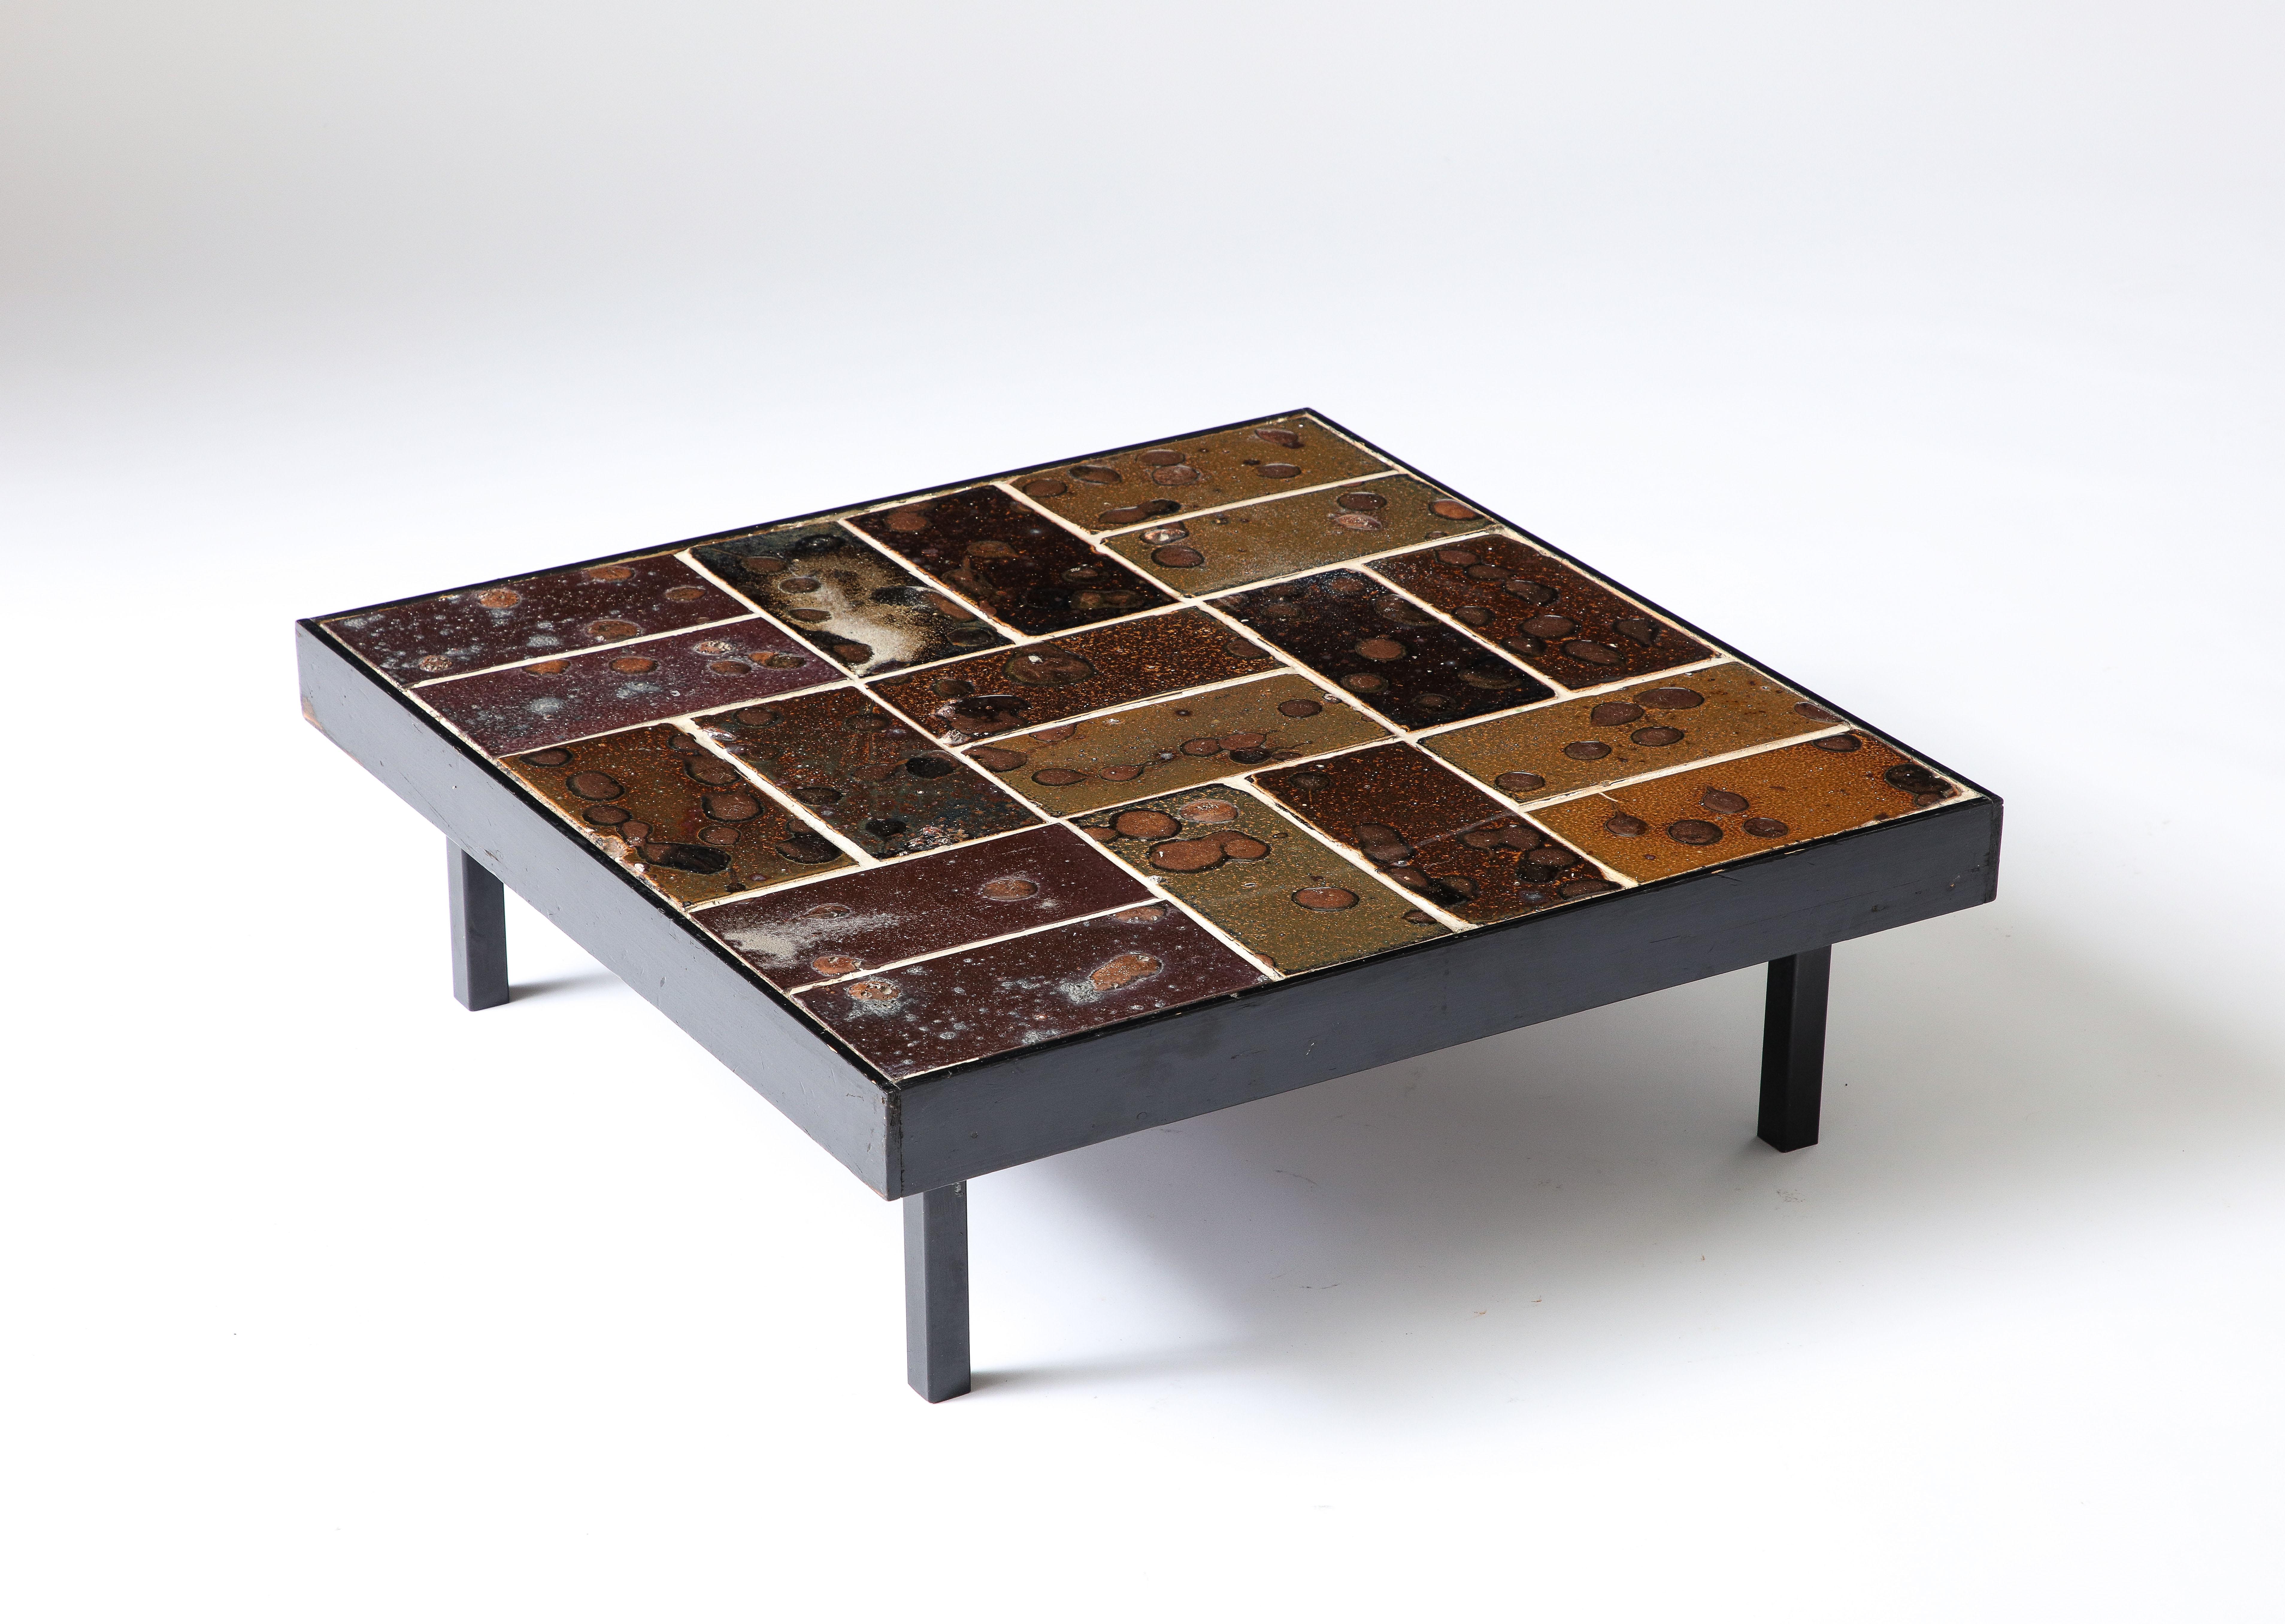 This table features glazed ceramic tiles with lots of texture and variation in tone. A solid, eye-catching piece.